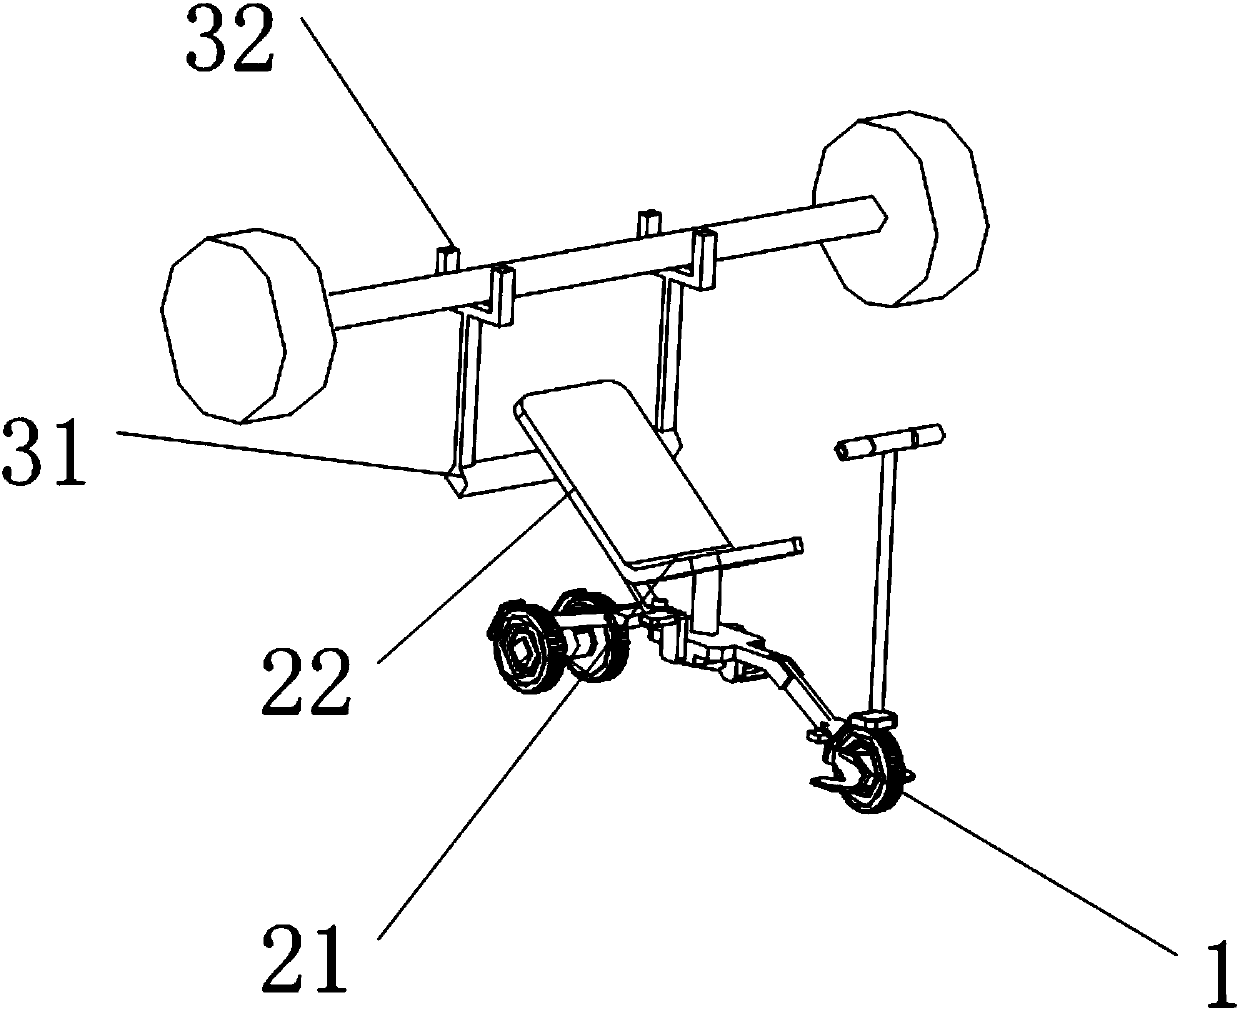 Exercise vehicle capable of being used as bench press frame